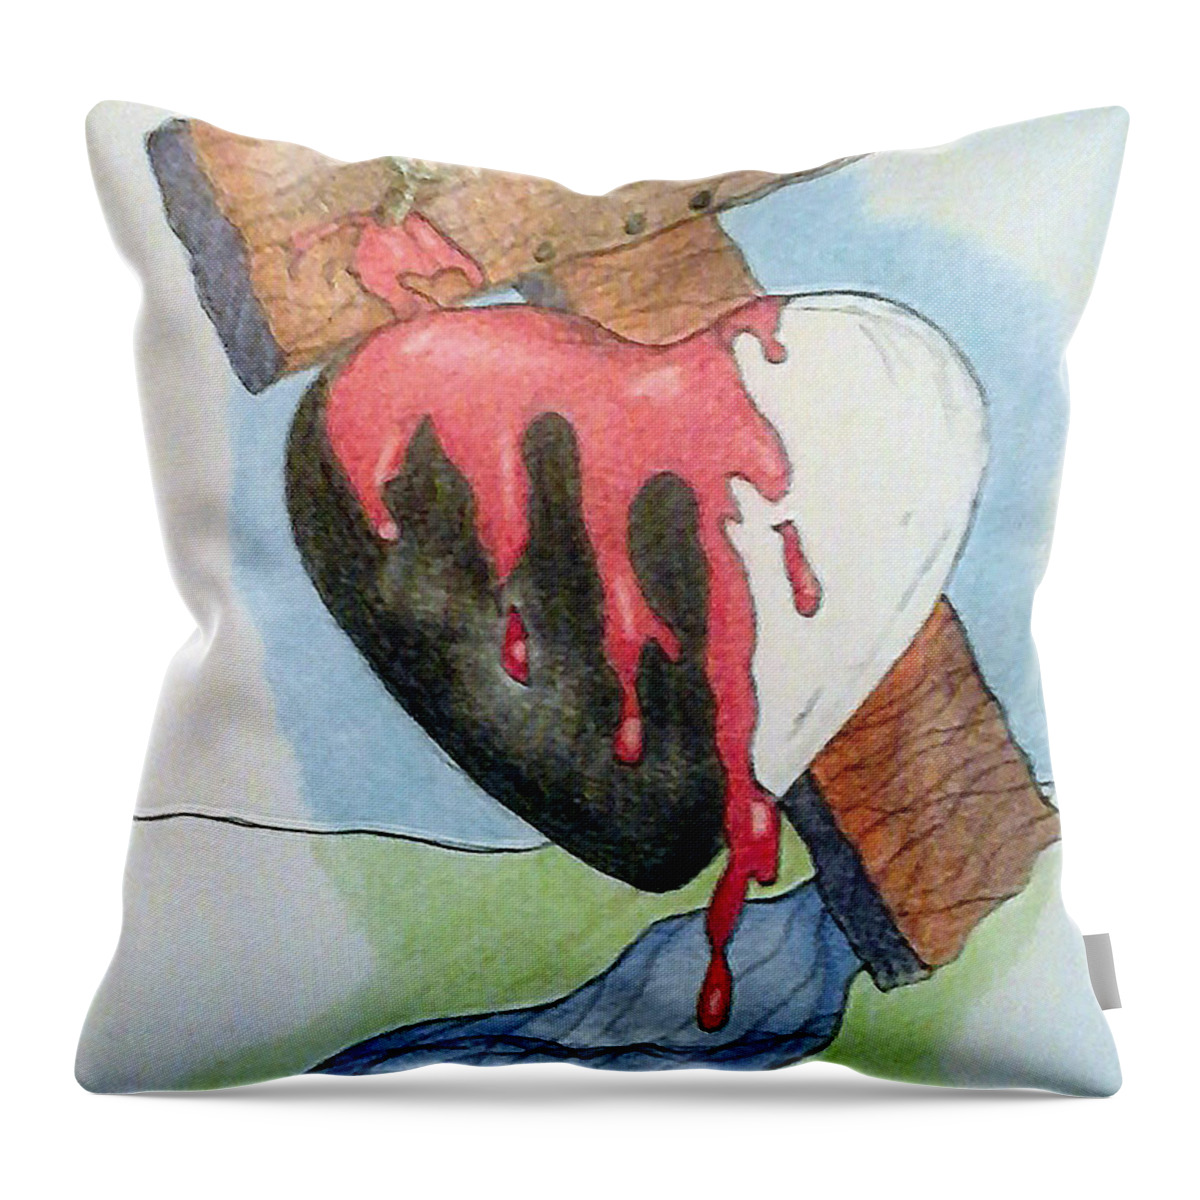 Christian Throw Pillow featuring the drawing Sin Washer by Loretta Nash